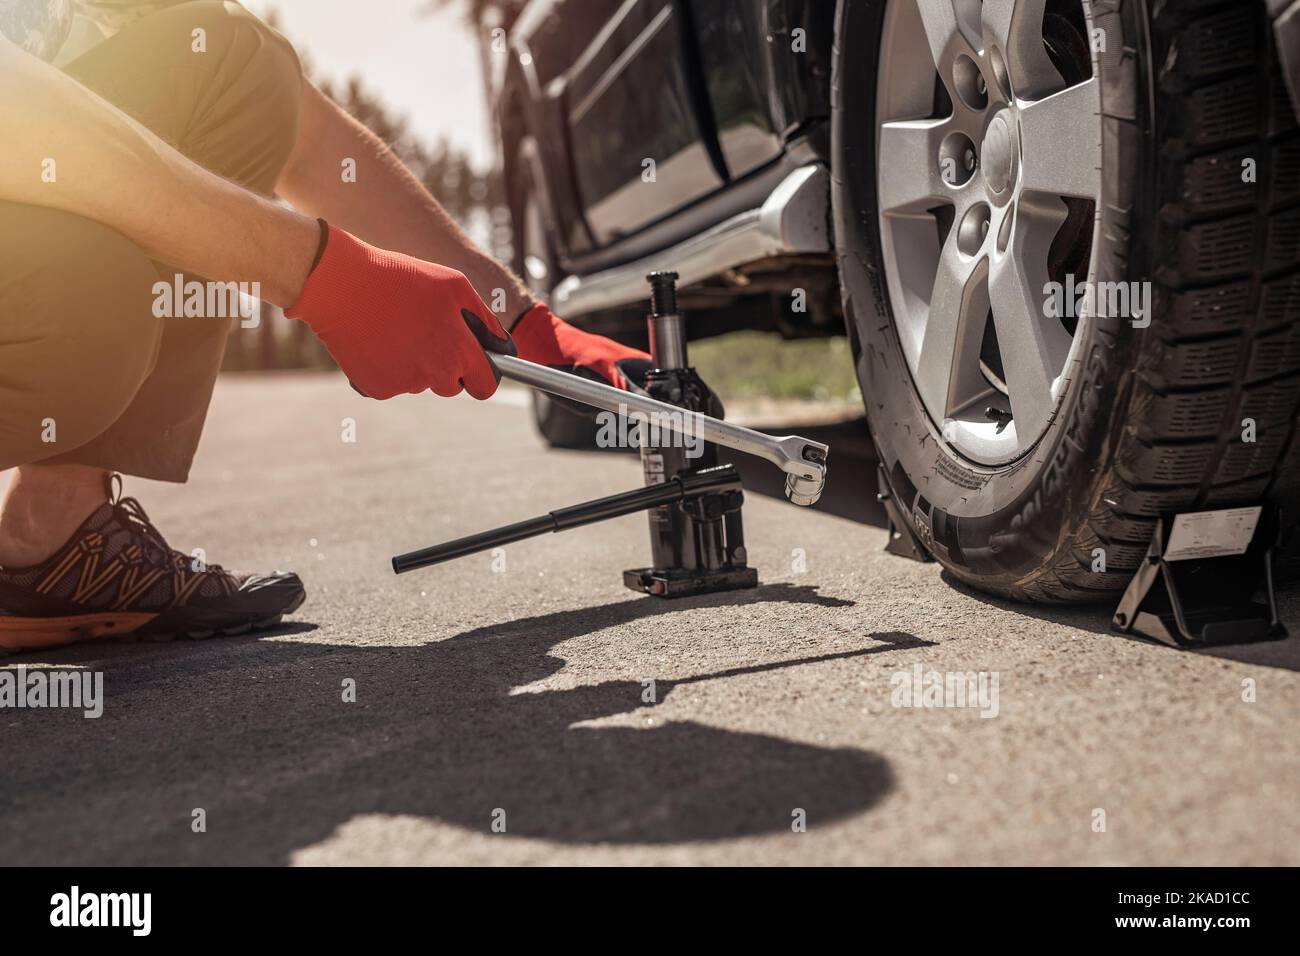 Hydraulic car jack is put under auto by hands in gloves, closeup. Stock Photo